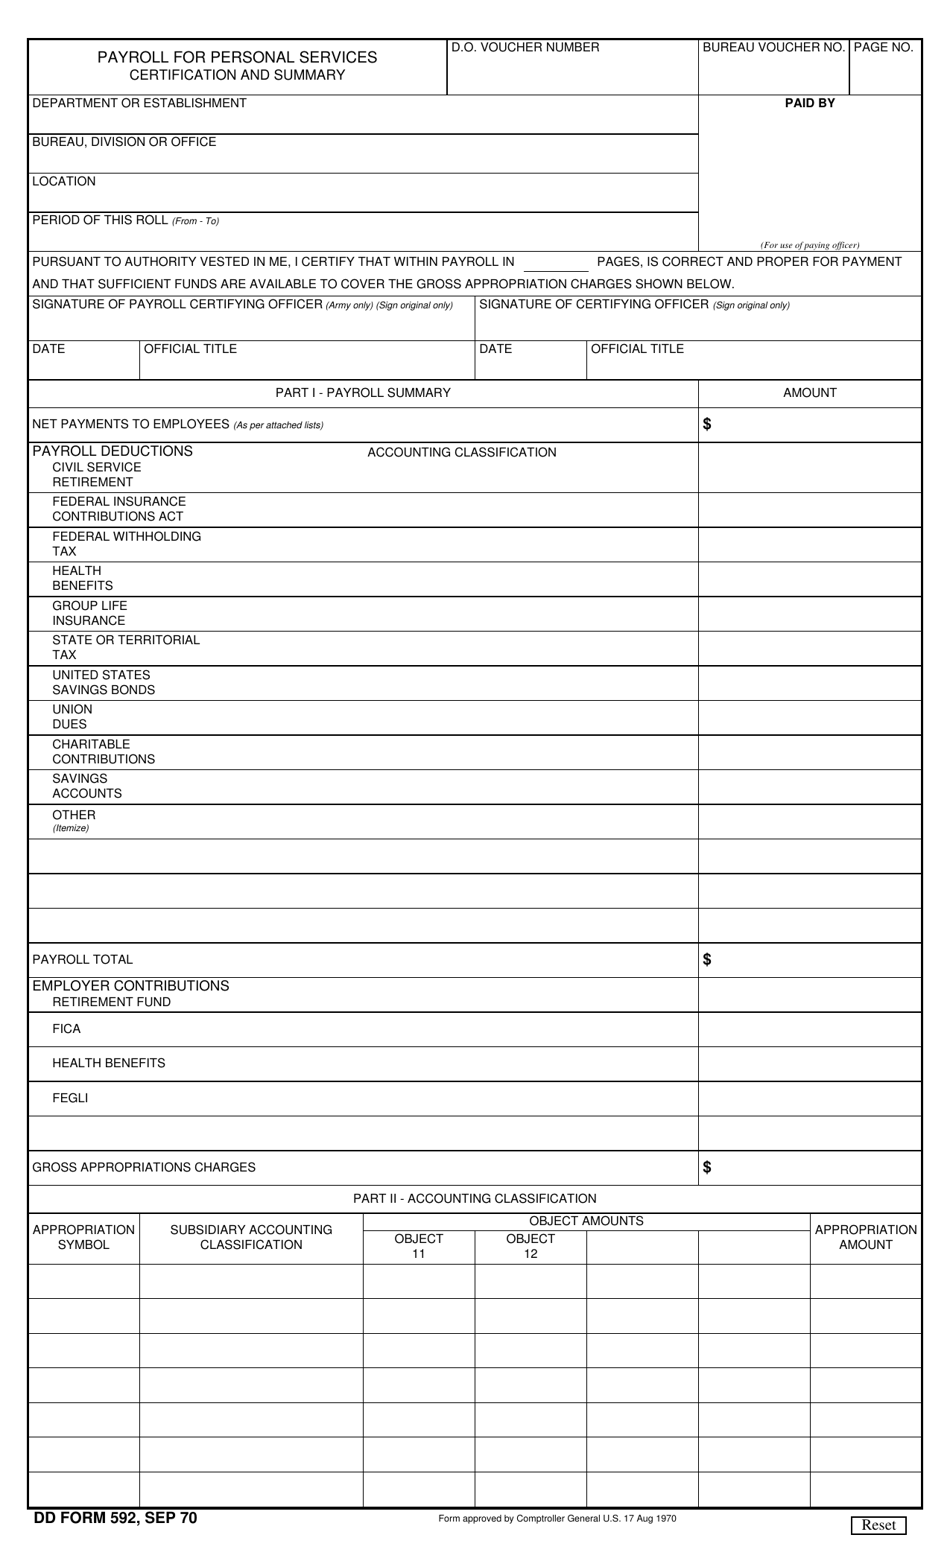 DD Form 592 Payroll for Personal Services Certification and Summary, Page 1